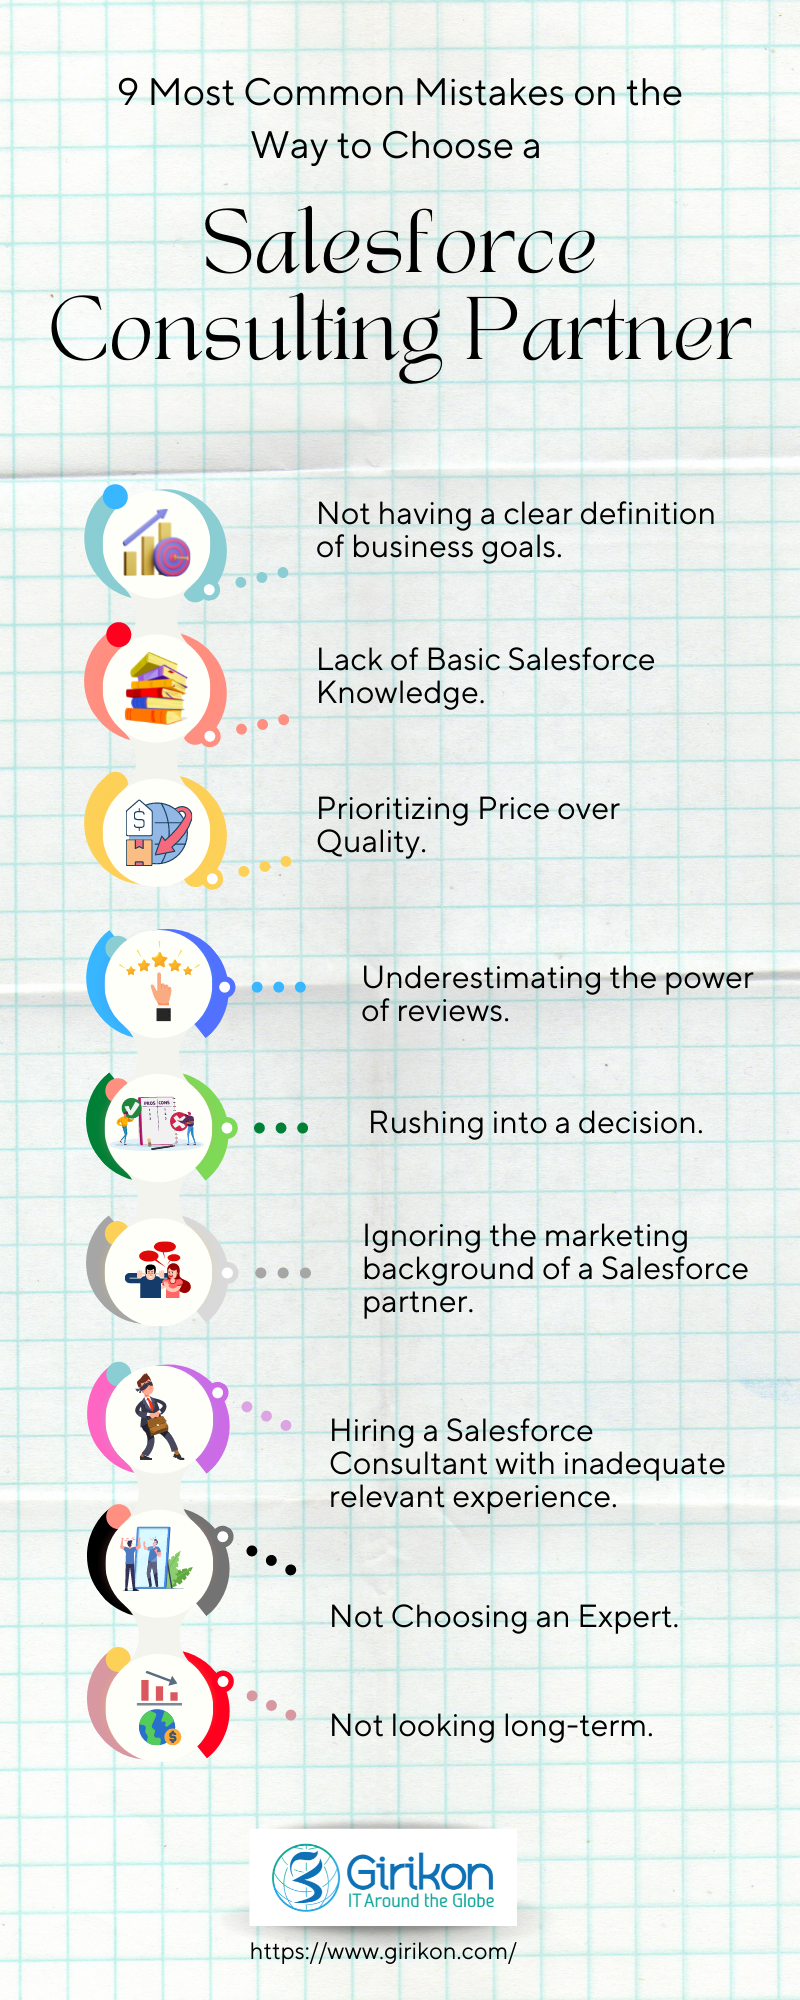 Mistakes on the Way to Choose a Salesforce Consulting Partner